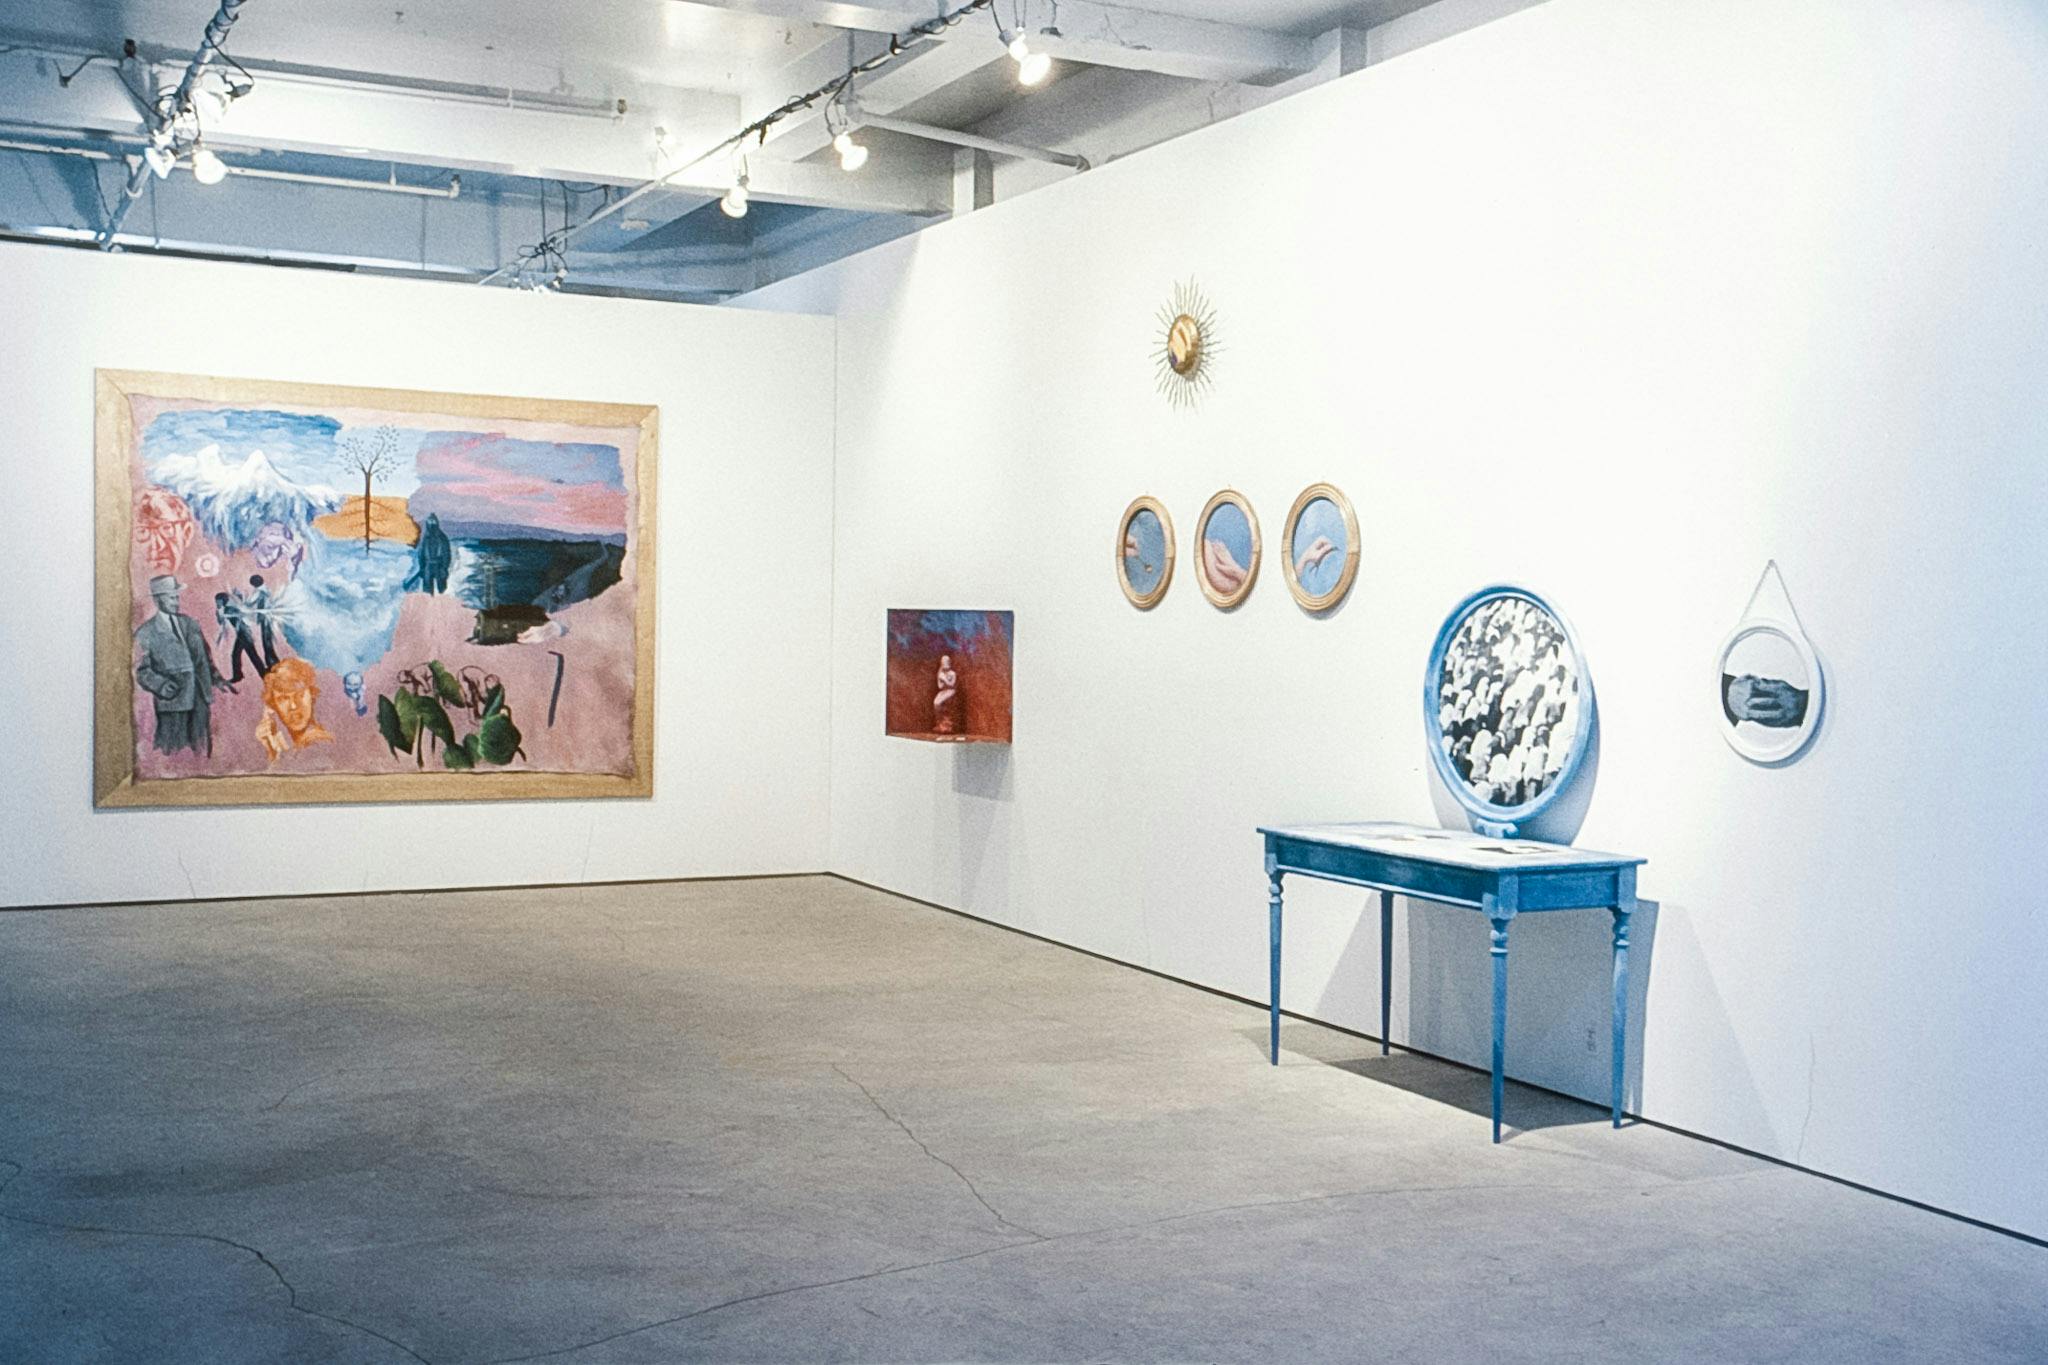 A corner in a gallery. On one wall, there is a large colourful painting in a gold frame. On the other wall there is a small red box with a sculpture on the wall, as well as other photos and a vanity.